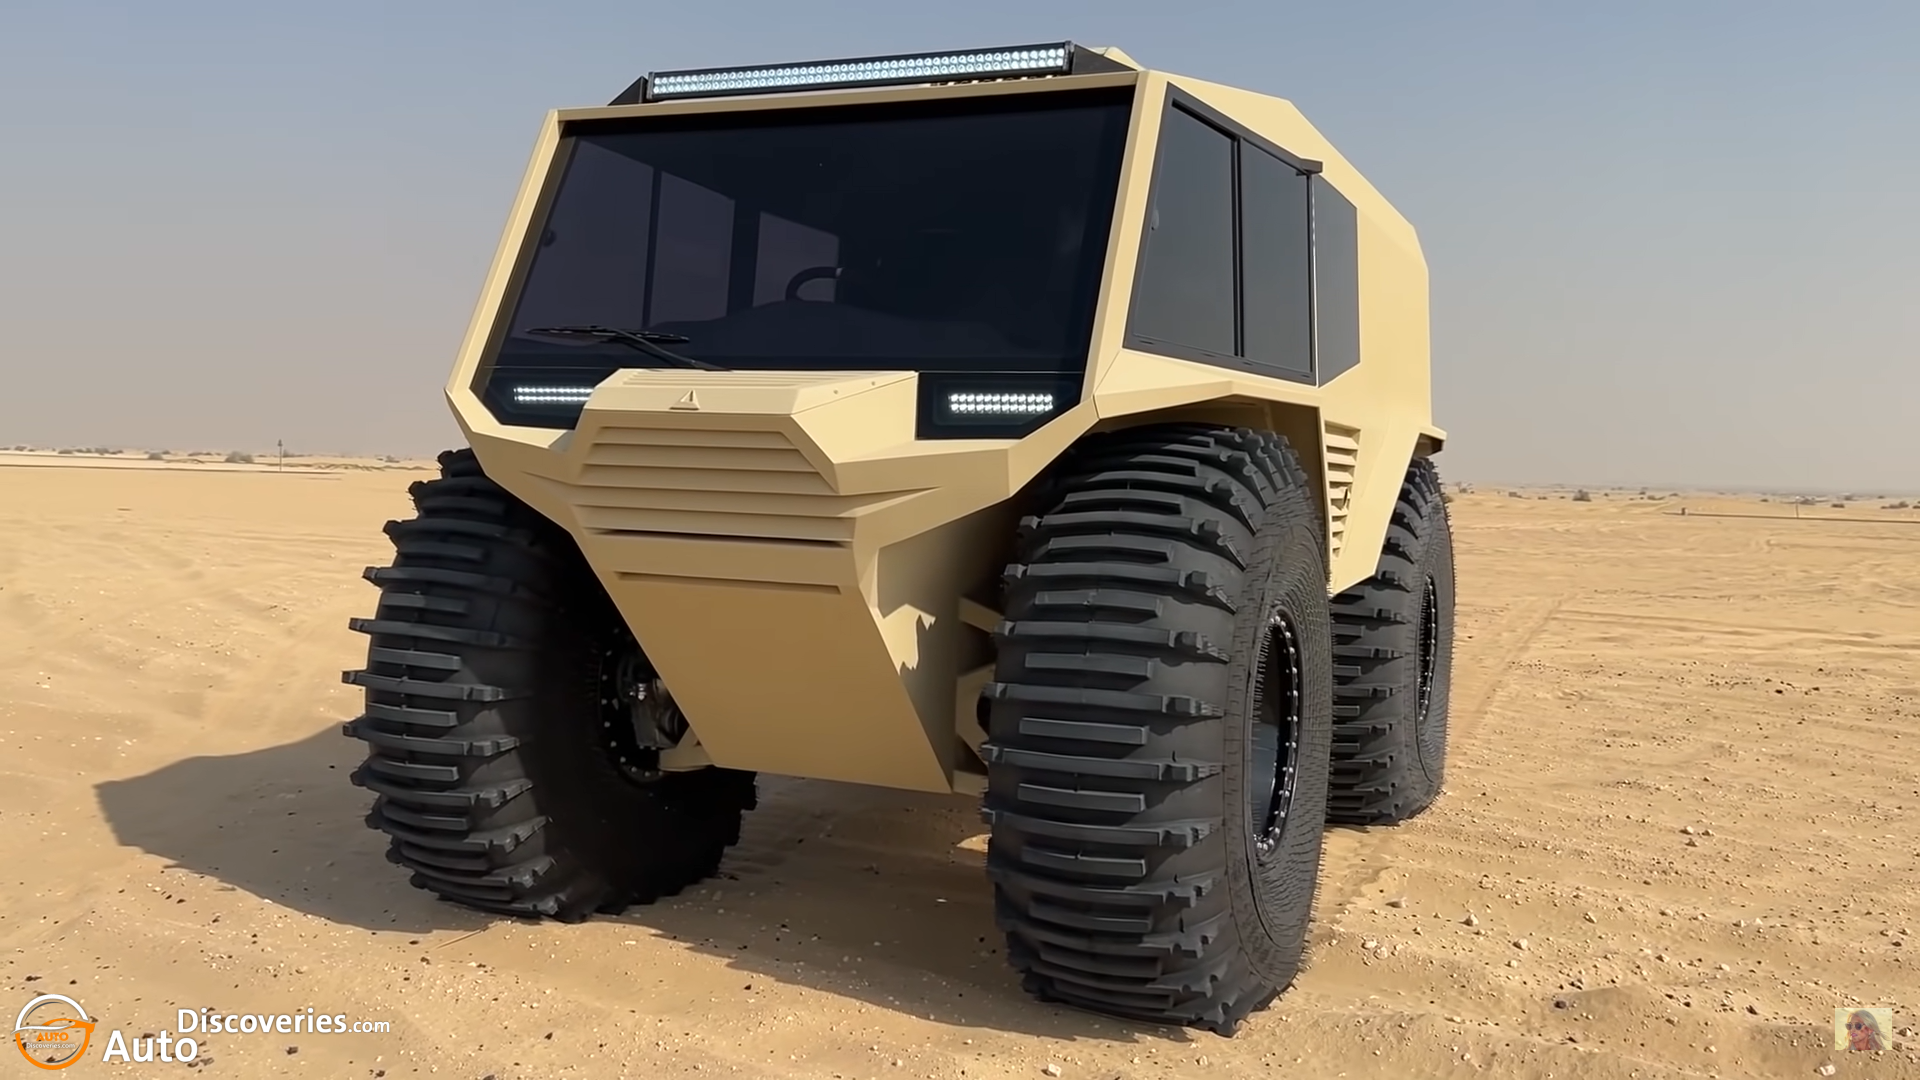 Worlds Coolest Offroad Vehicle Atlas Atv Auto Discoveries